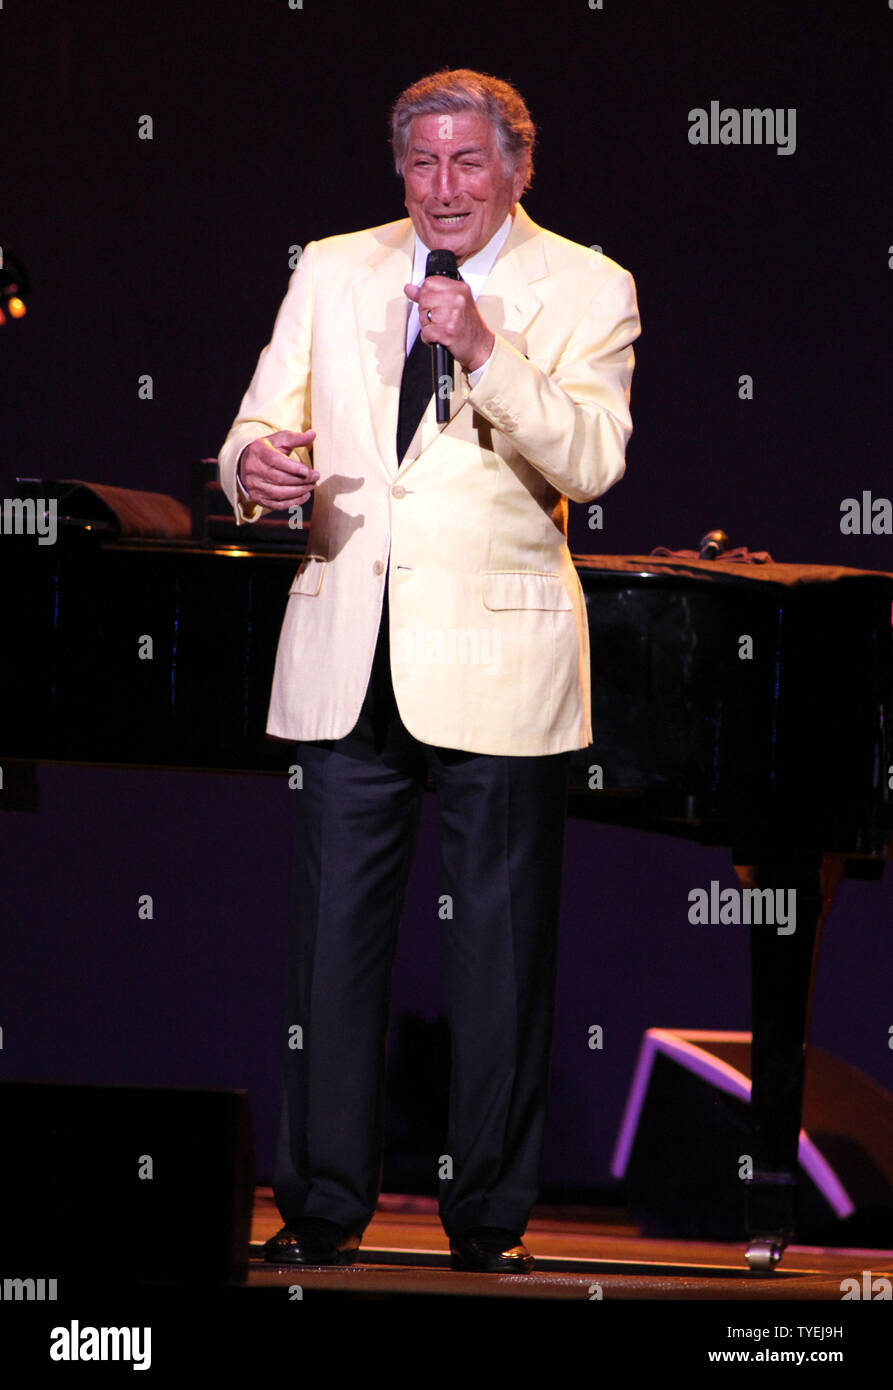 Tony Bennett performs at the Hard Rock Live at Seminole Hard Rock Hotel and Casino in Hollywood, Florida on March 14, 2014. UPI/Michael Bush Stock Photo